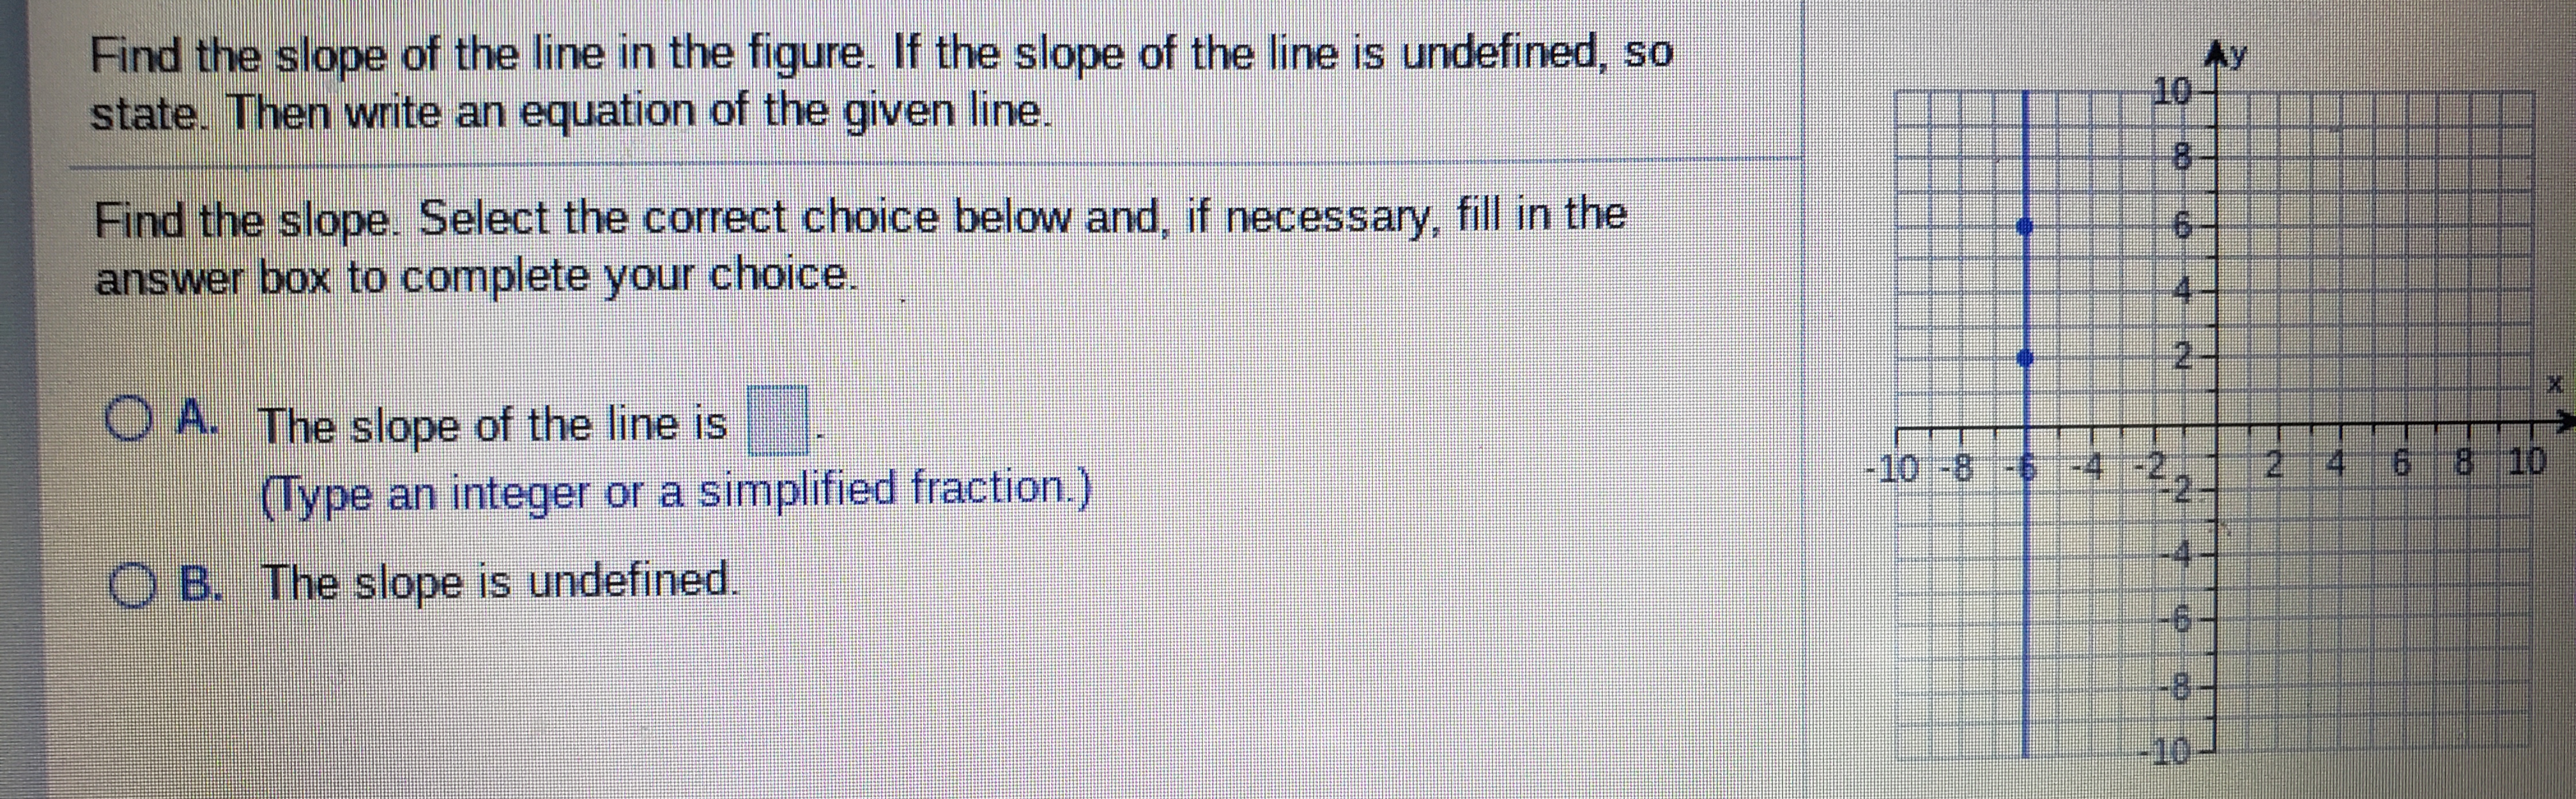 Find the slope of the line in the figure. If the slope of the line is undefined, so
state. Then write an equation of the given line.
Ay
10
8.
Find the slope. Select the correct choice below and, if necessary, fill in the
answer box to complete your choice.
9.
4.
O A. The slope of the line is
(Type an integer or a simplified fraction.)
- -4 -2,
-10-8
6 8 10
-4
O B. The slope is undefined.
-9-
8-
-10
2.
6.
2.
